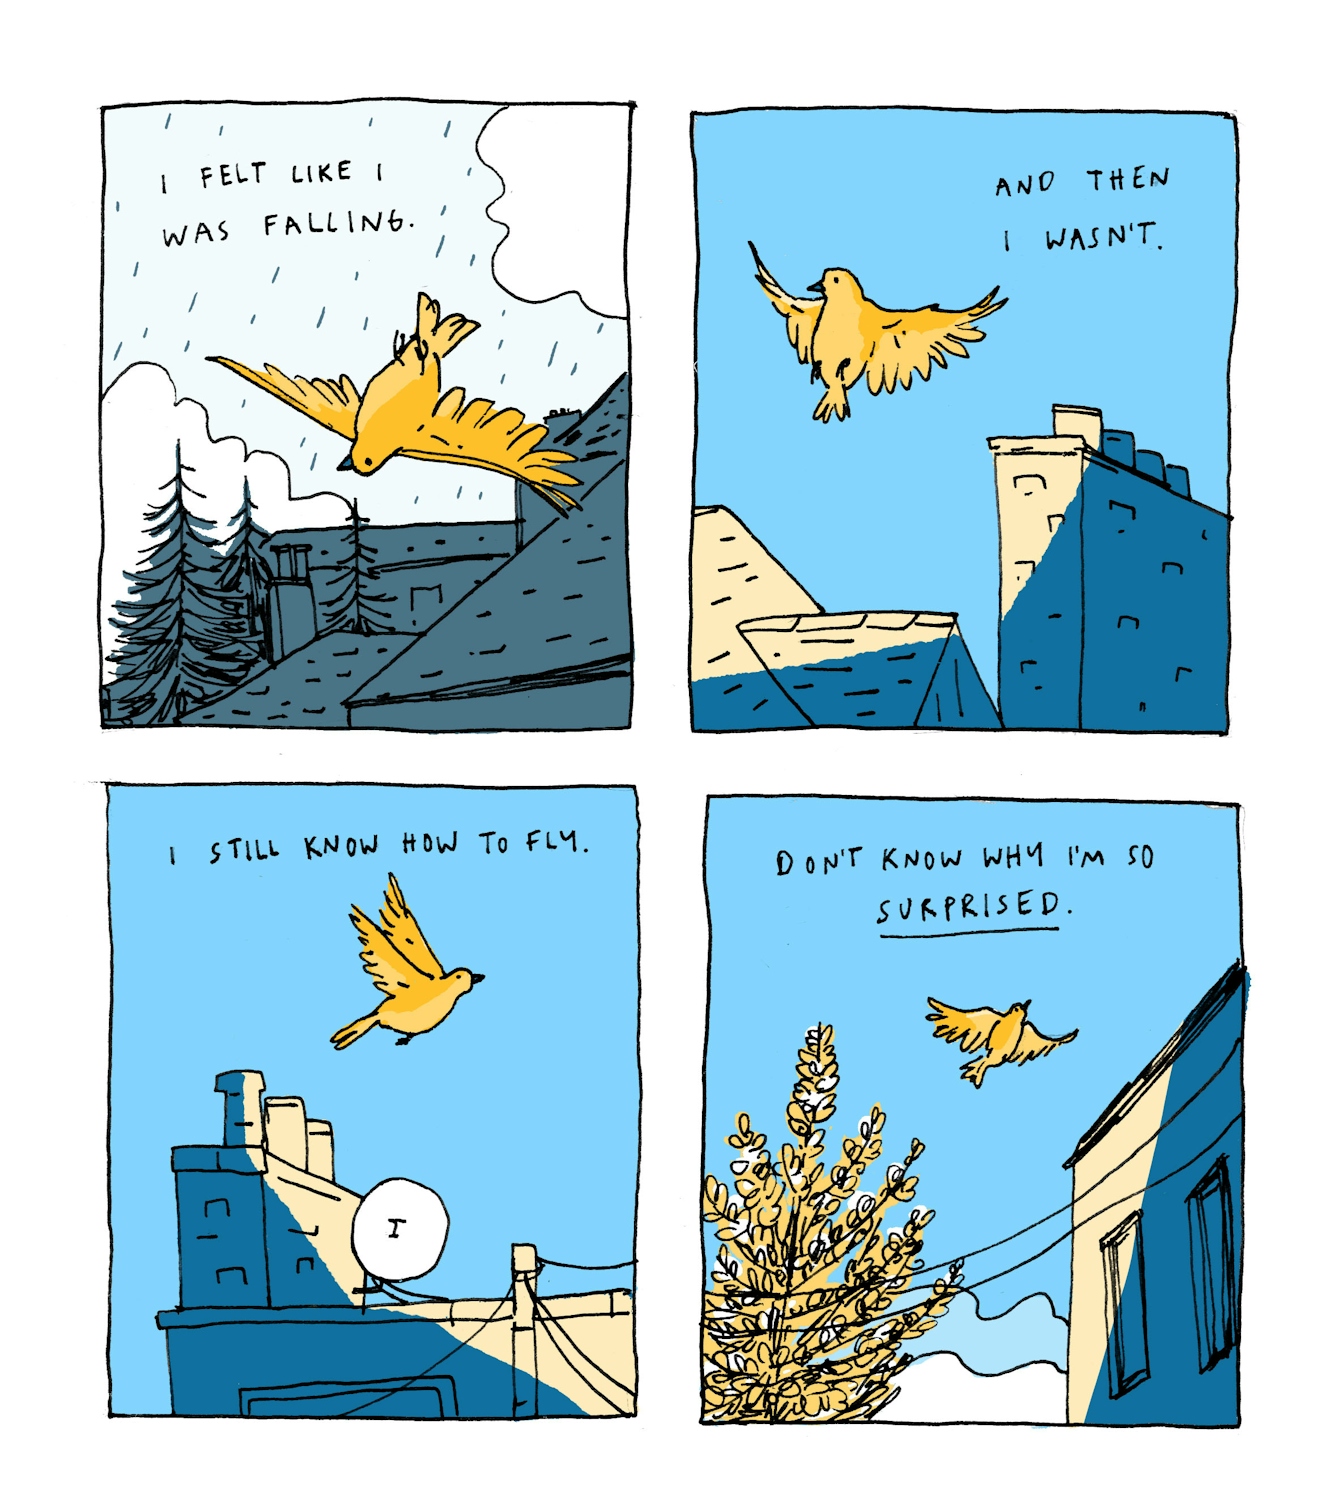 First panel
Text: I felt like I was falling.
The illustration shows a gold-coloured bird falling through a cloudy, rainy, grey sky towards buildings and trees.

Second panel
Text: And then I wasn’t.
The weather is clear; the bird is now gliding through the air through the blue sky, over sun-speckled rooftops.

Third panel
Text: I still know how to fly
The bird is continuing to fly over chimneys and satellite dishes.

Fourth panel
Text: Don’t know why I’m so surprised
The bird is getting smaller in the distance, leaving behind a blossoming tree next to a building.